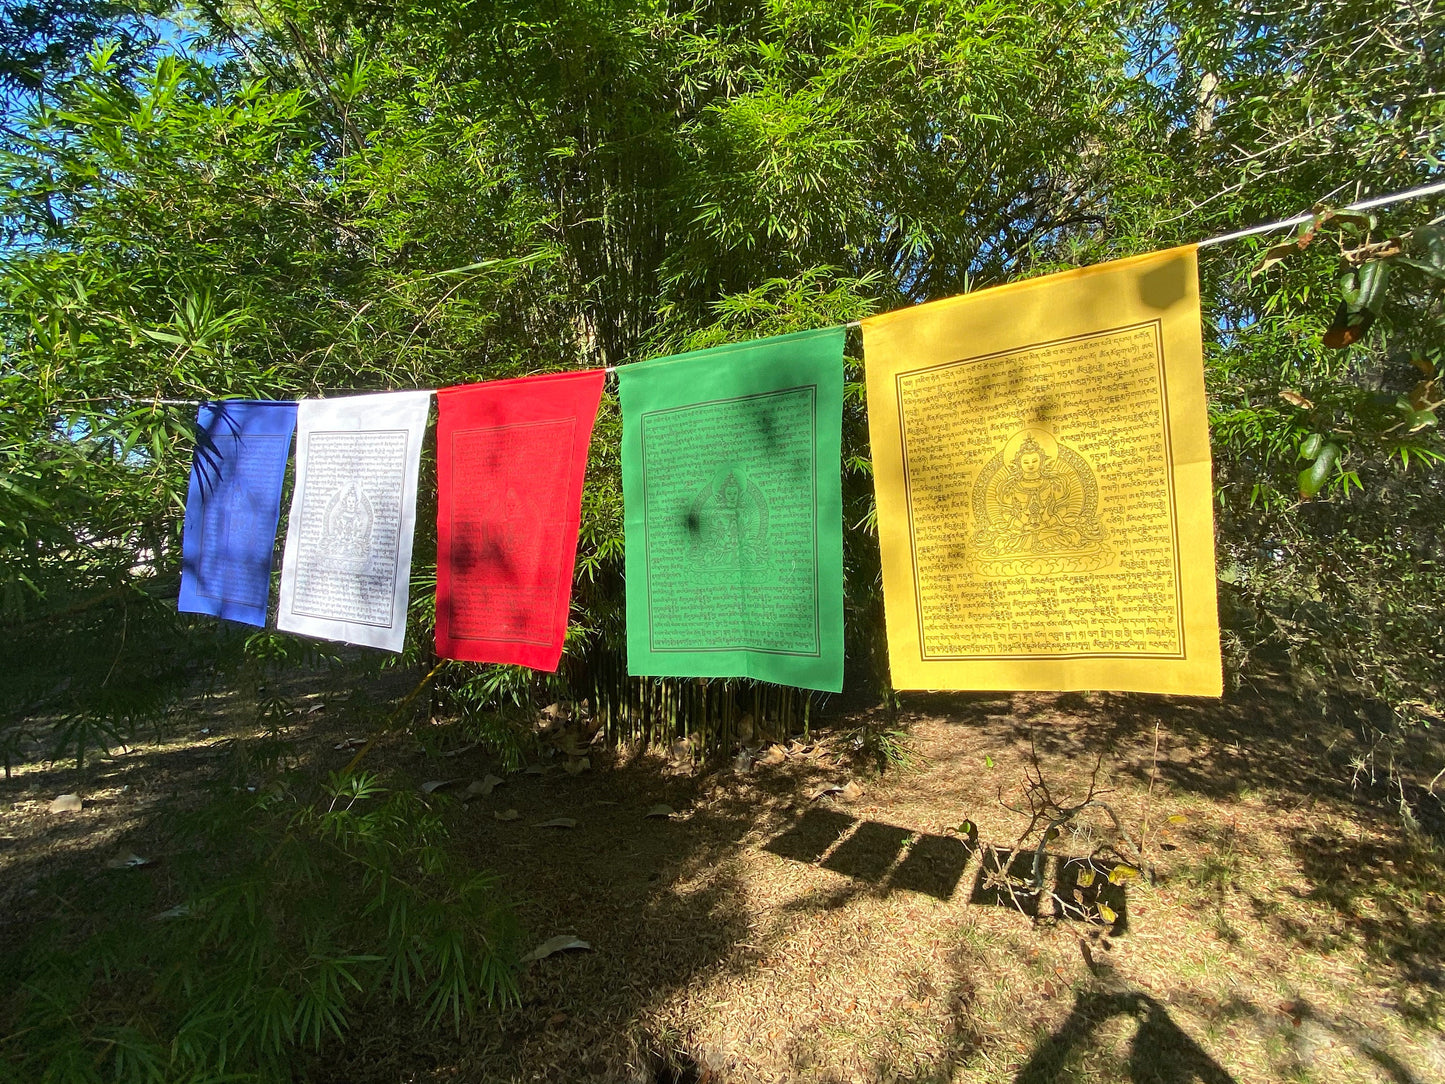 A set of 5 Amitayus prayer flags, The Buddha of Boundless Life hanging outside in dappled light, featuring blue, white, red, green, and yellow flags representing the five elements  spreading of abundant long life blessings in every direction.